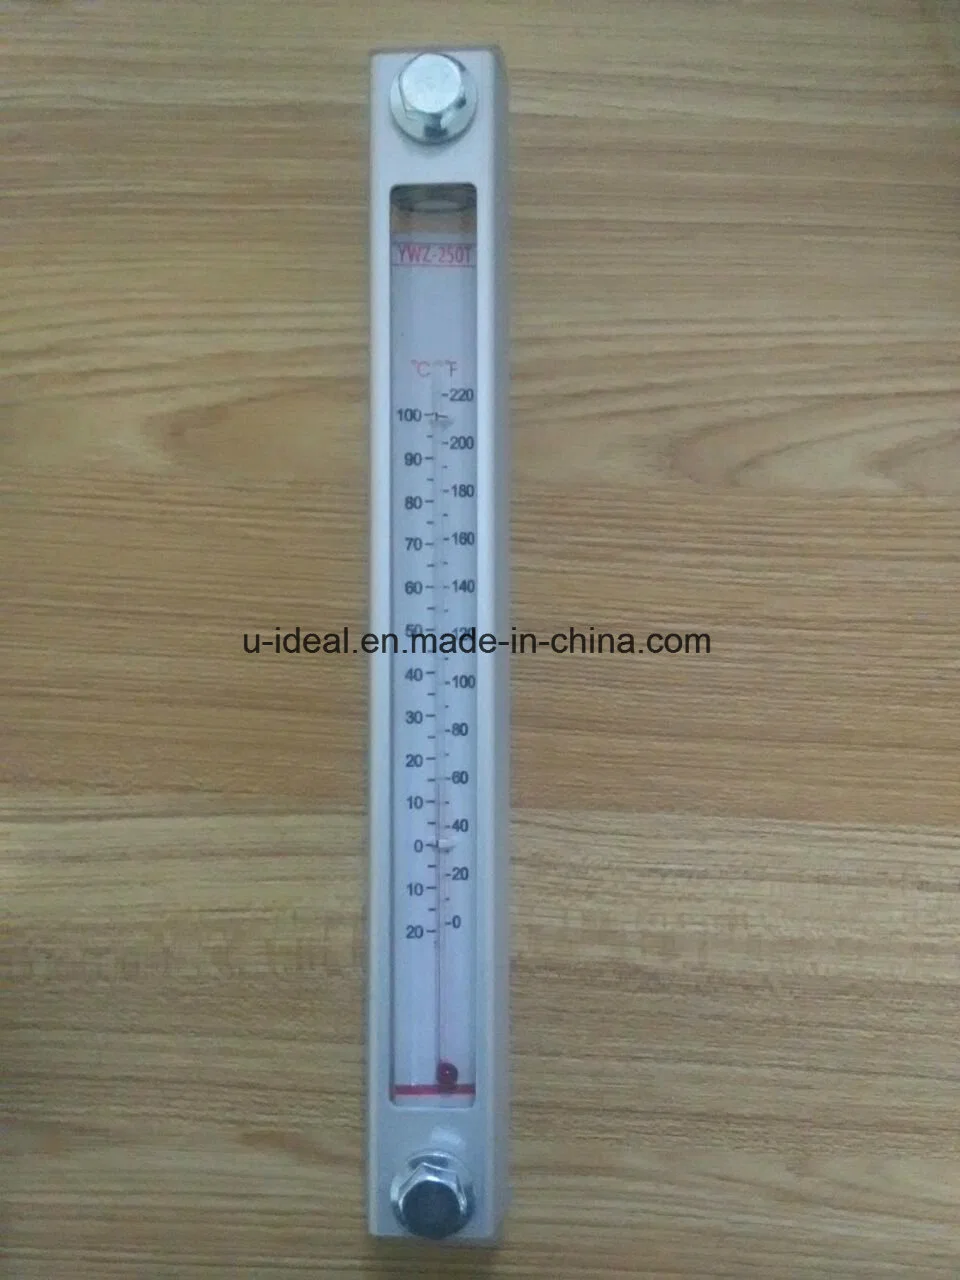 Oil Sight Glass- Level Gauge with Thermomete- Oil Level Indicator